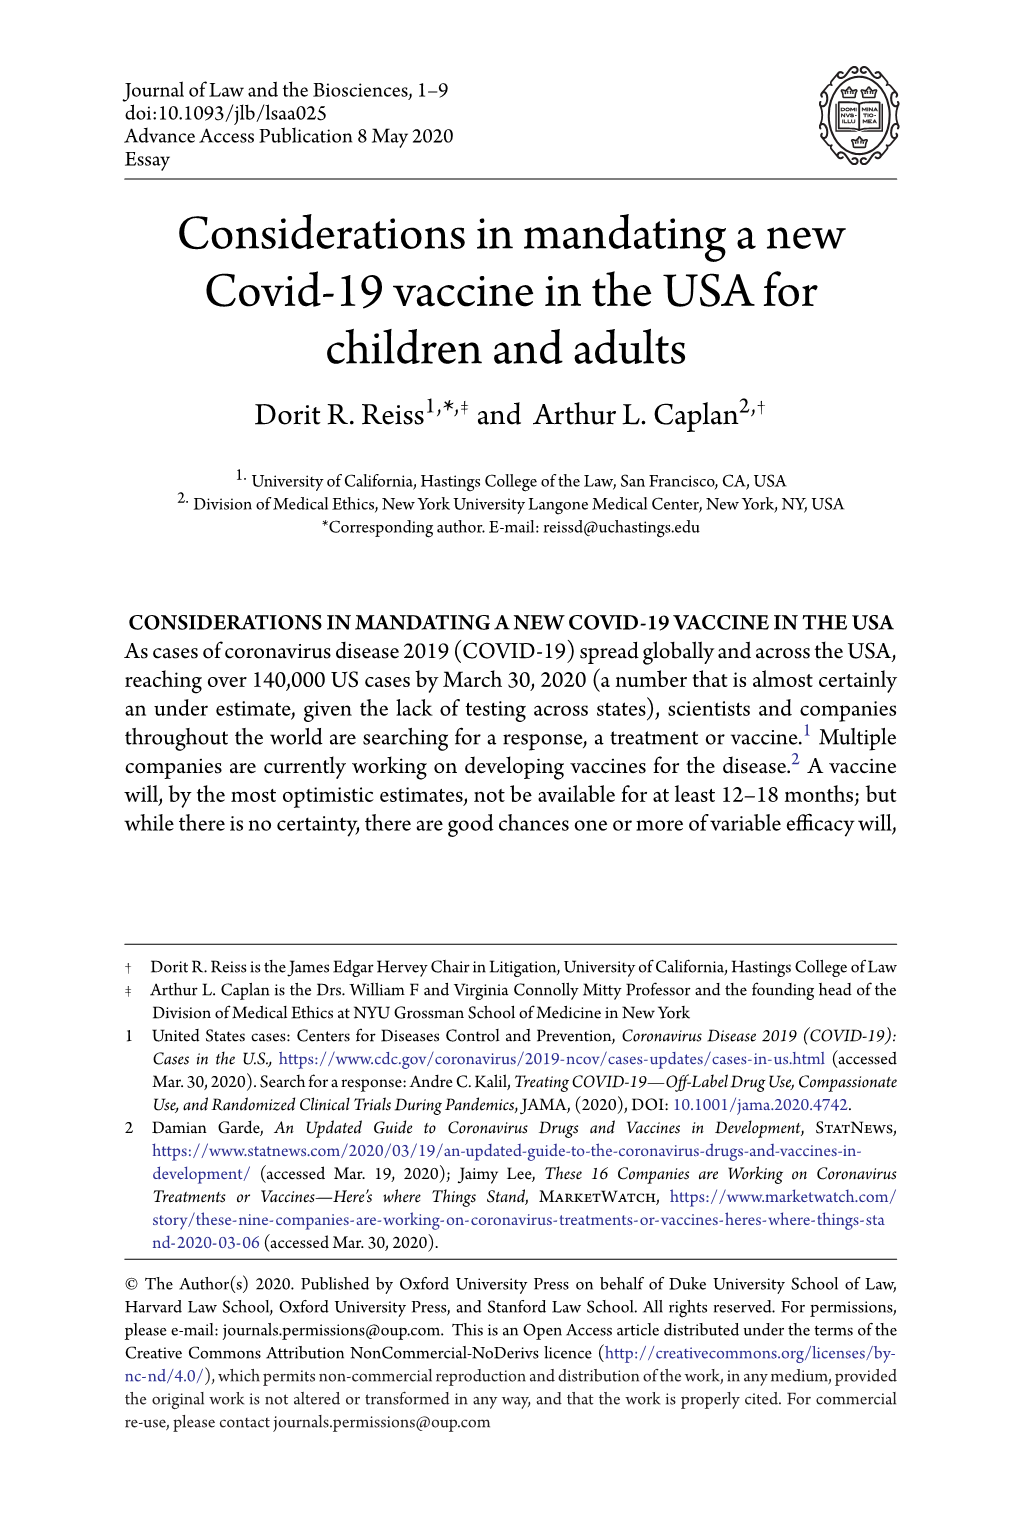 Considerations in Mandating a New Covid-19 Vaccine in the USA for Children and Adults Dorit R